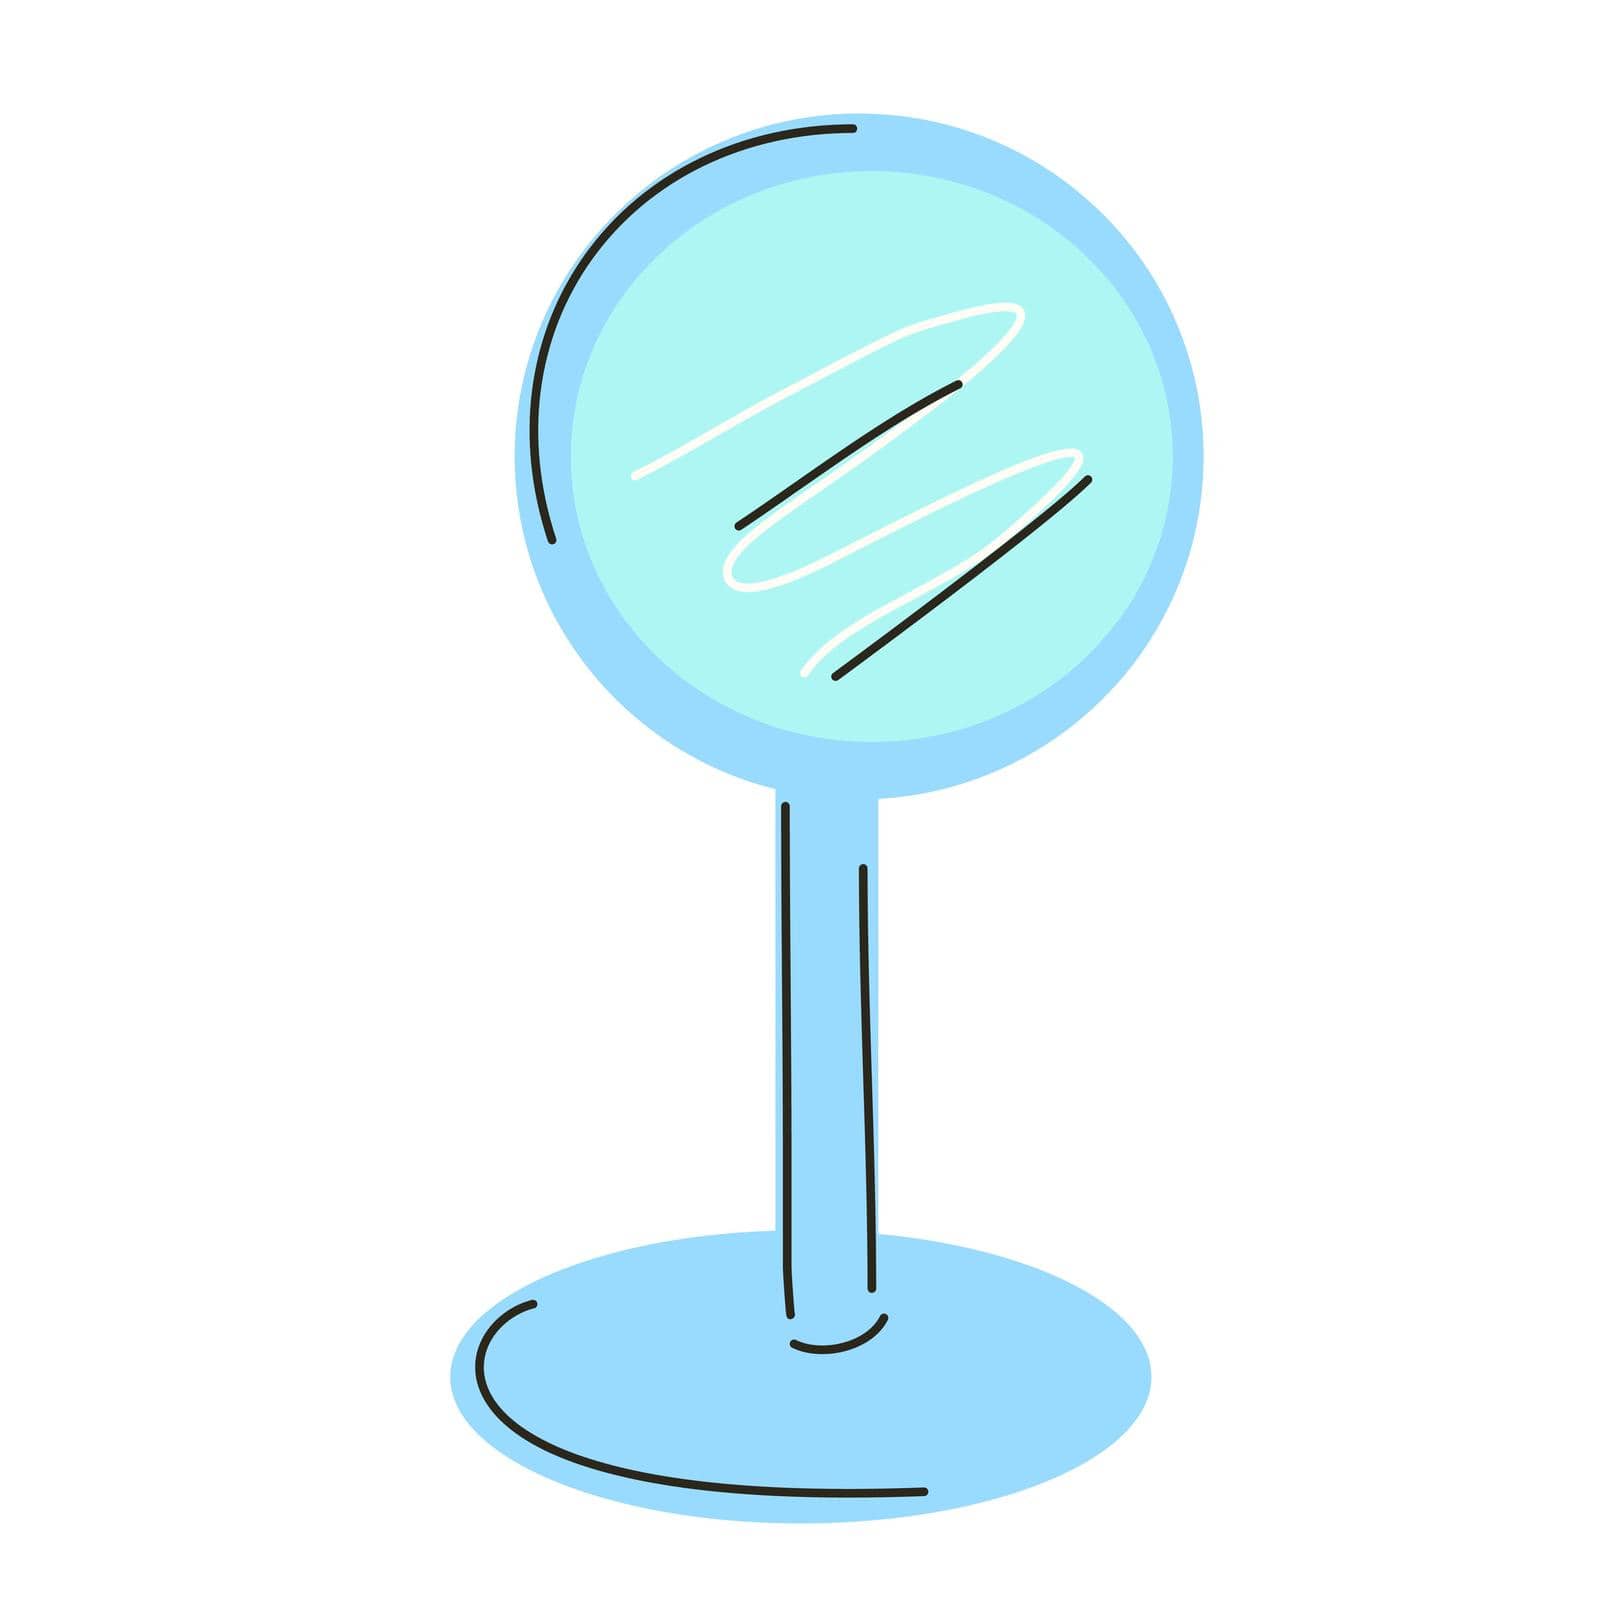 Table mirror on a white background. Isolated element in doodle style.